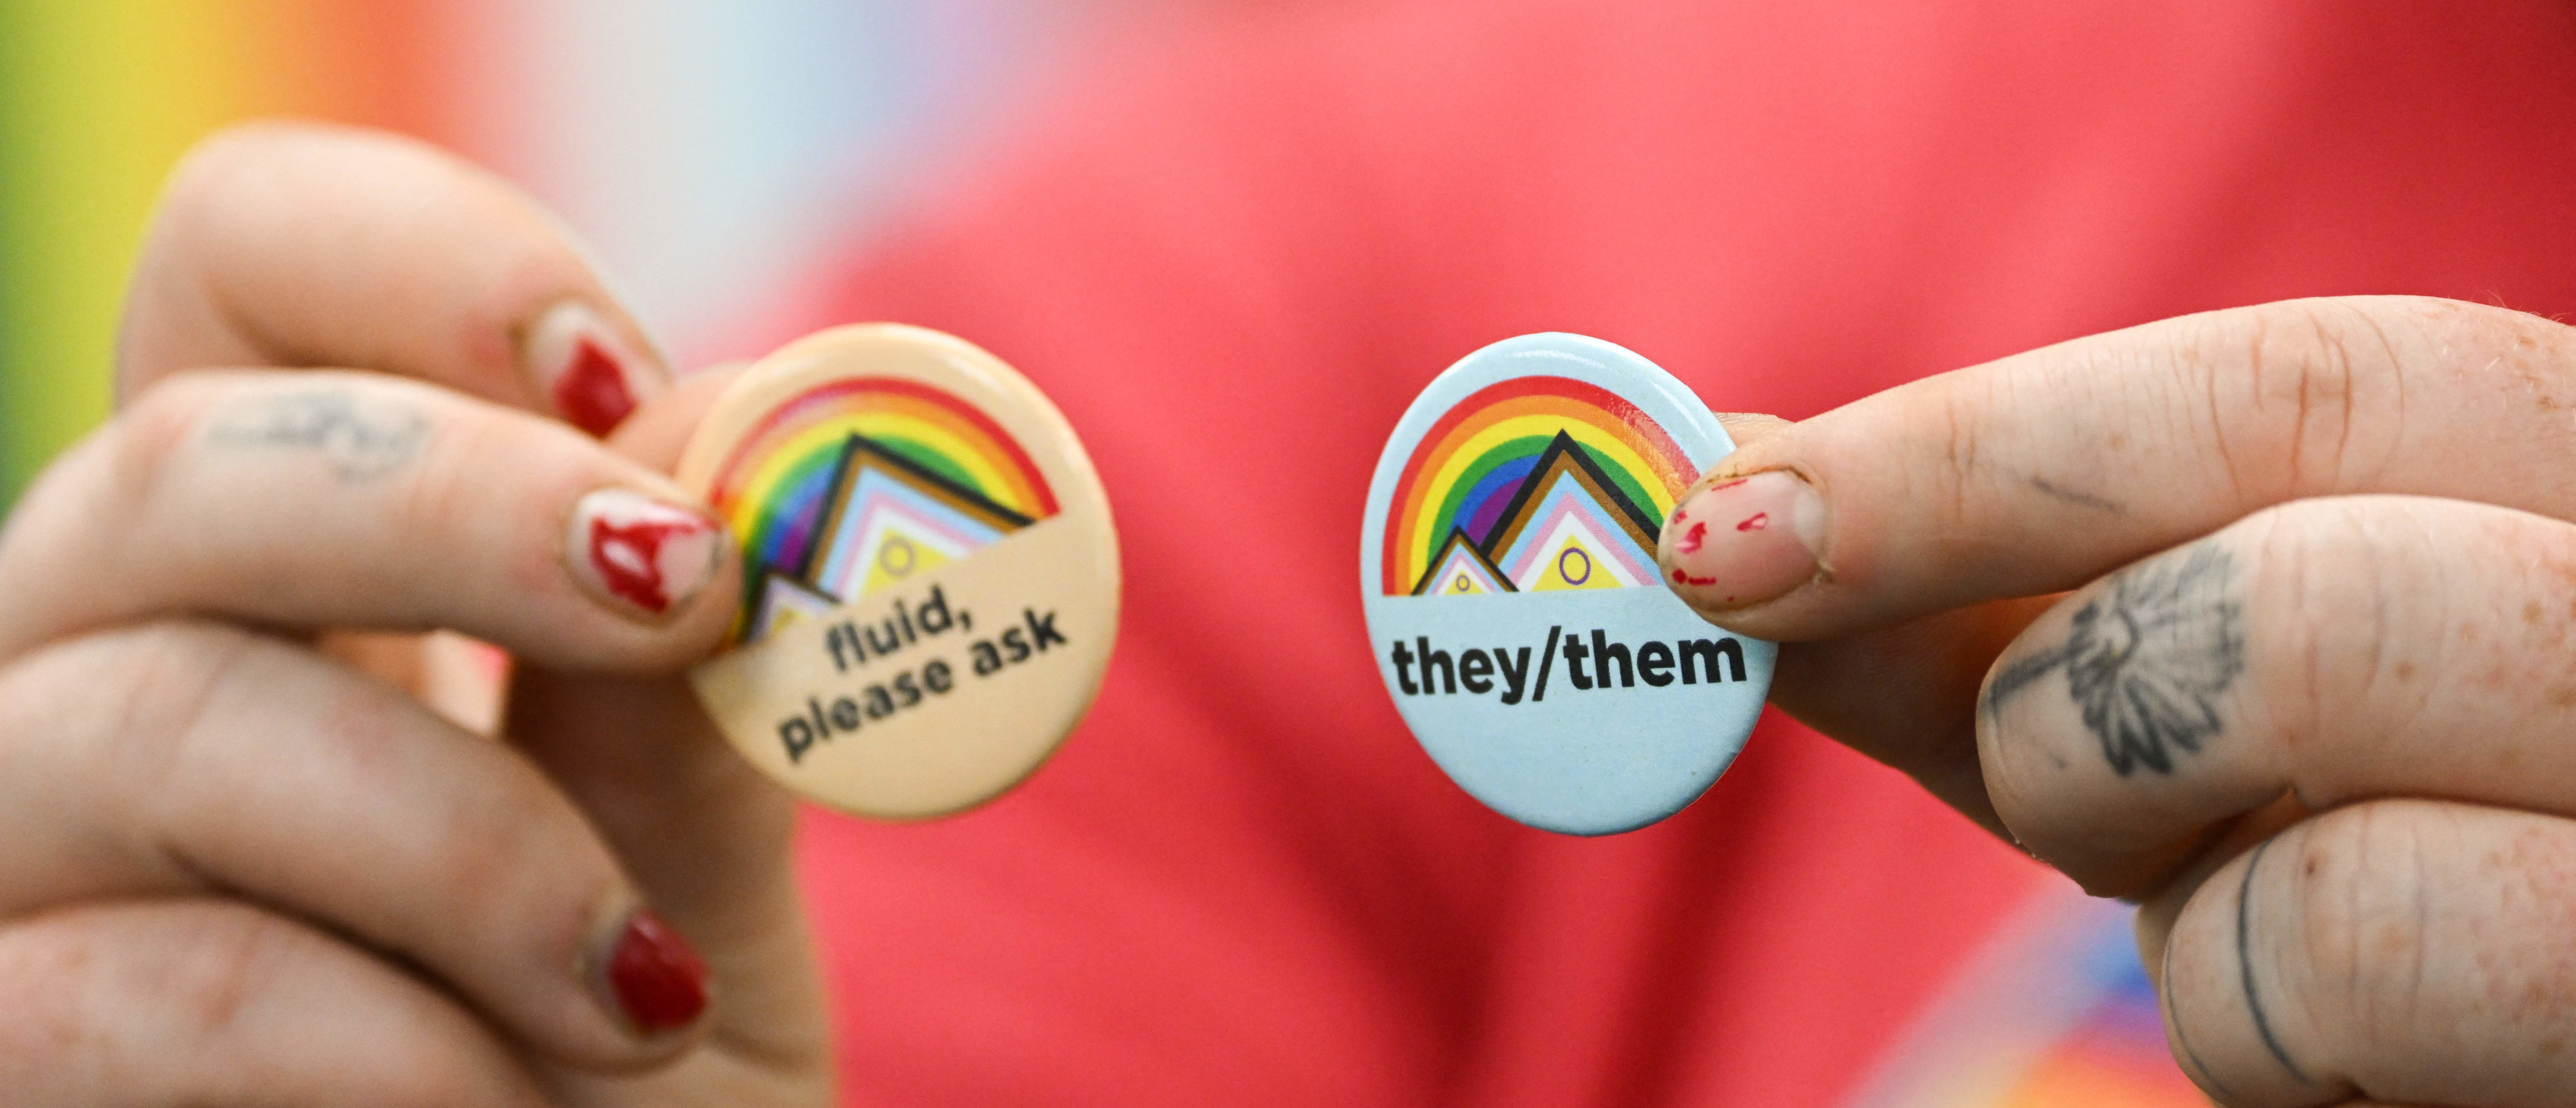 Laramie LGBTQ residen and University of Wyoming Alumni Ray Kasckow holds pins about gender pronouns, on the University of Wyoming campus in Laramie, Wyoming, on August 13, 2022.